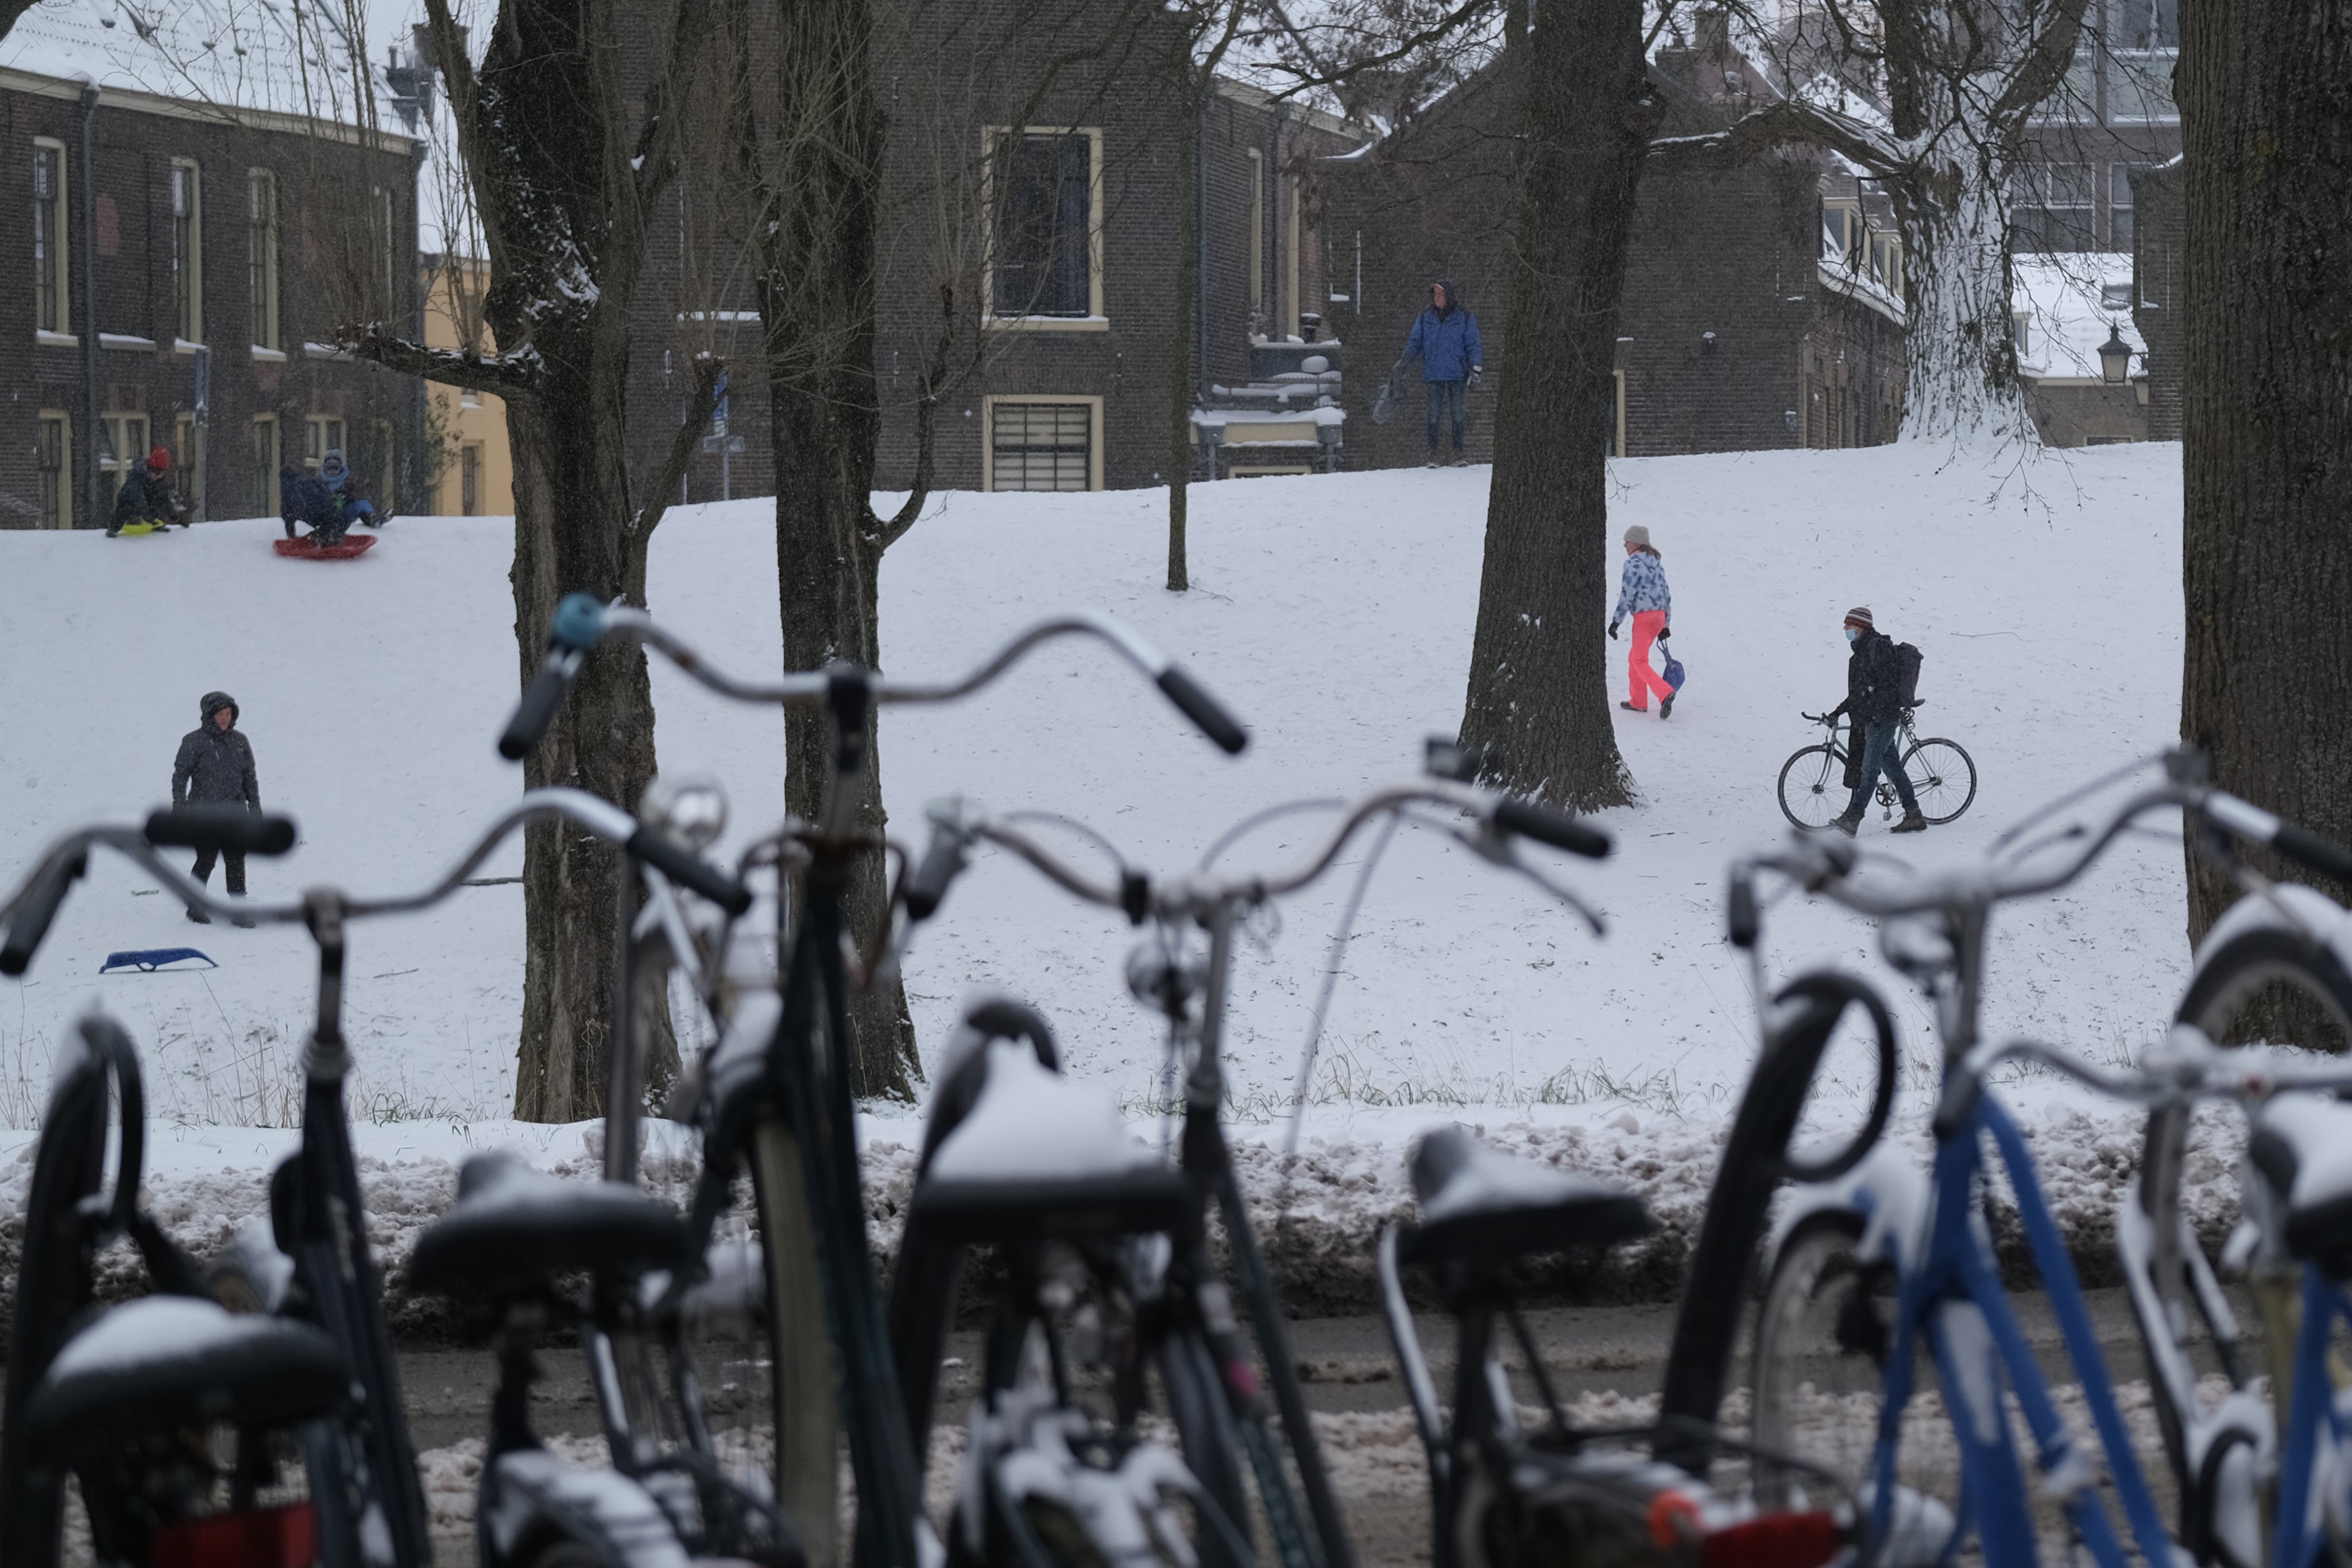 Meteorological Institute Issues Code Red As The First Snowstorm Since 2010 Hits The Netherlands